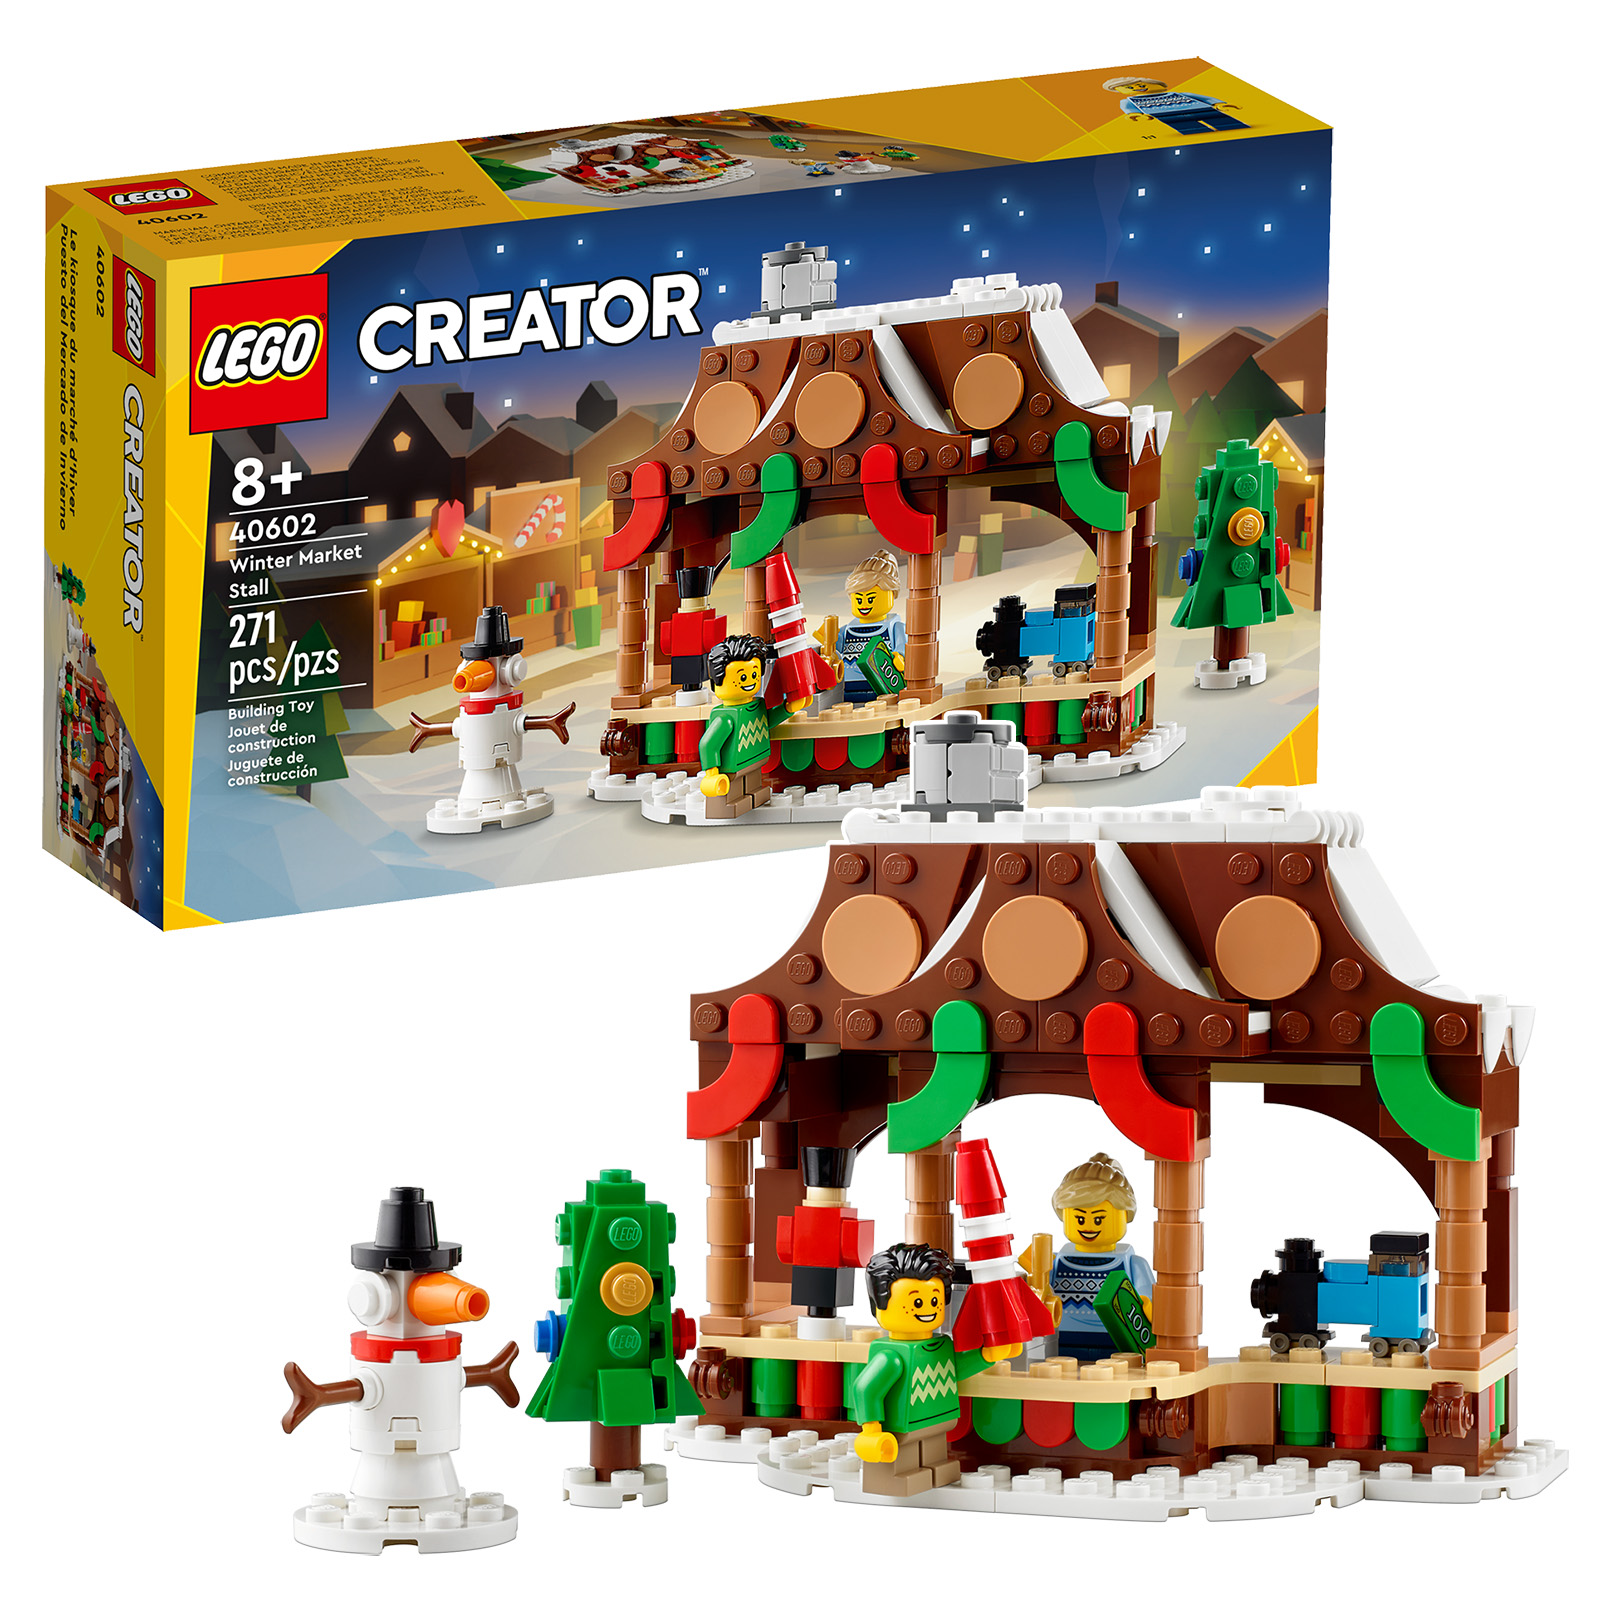 UK-only] Exclusive LEGO Promo Code - get a free 40578 Sandwich